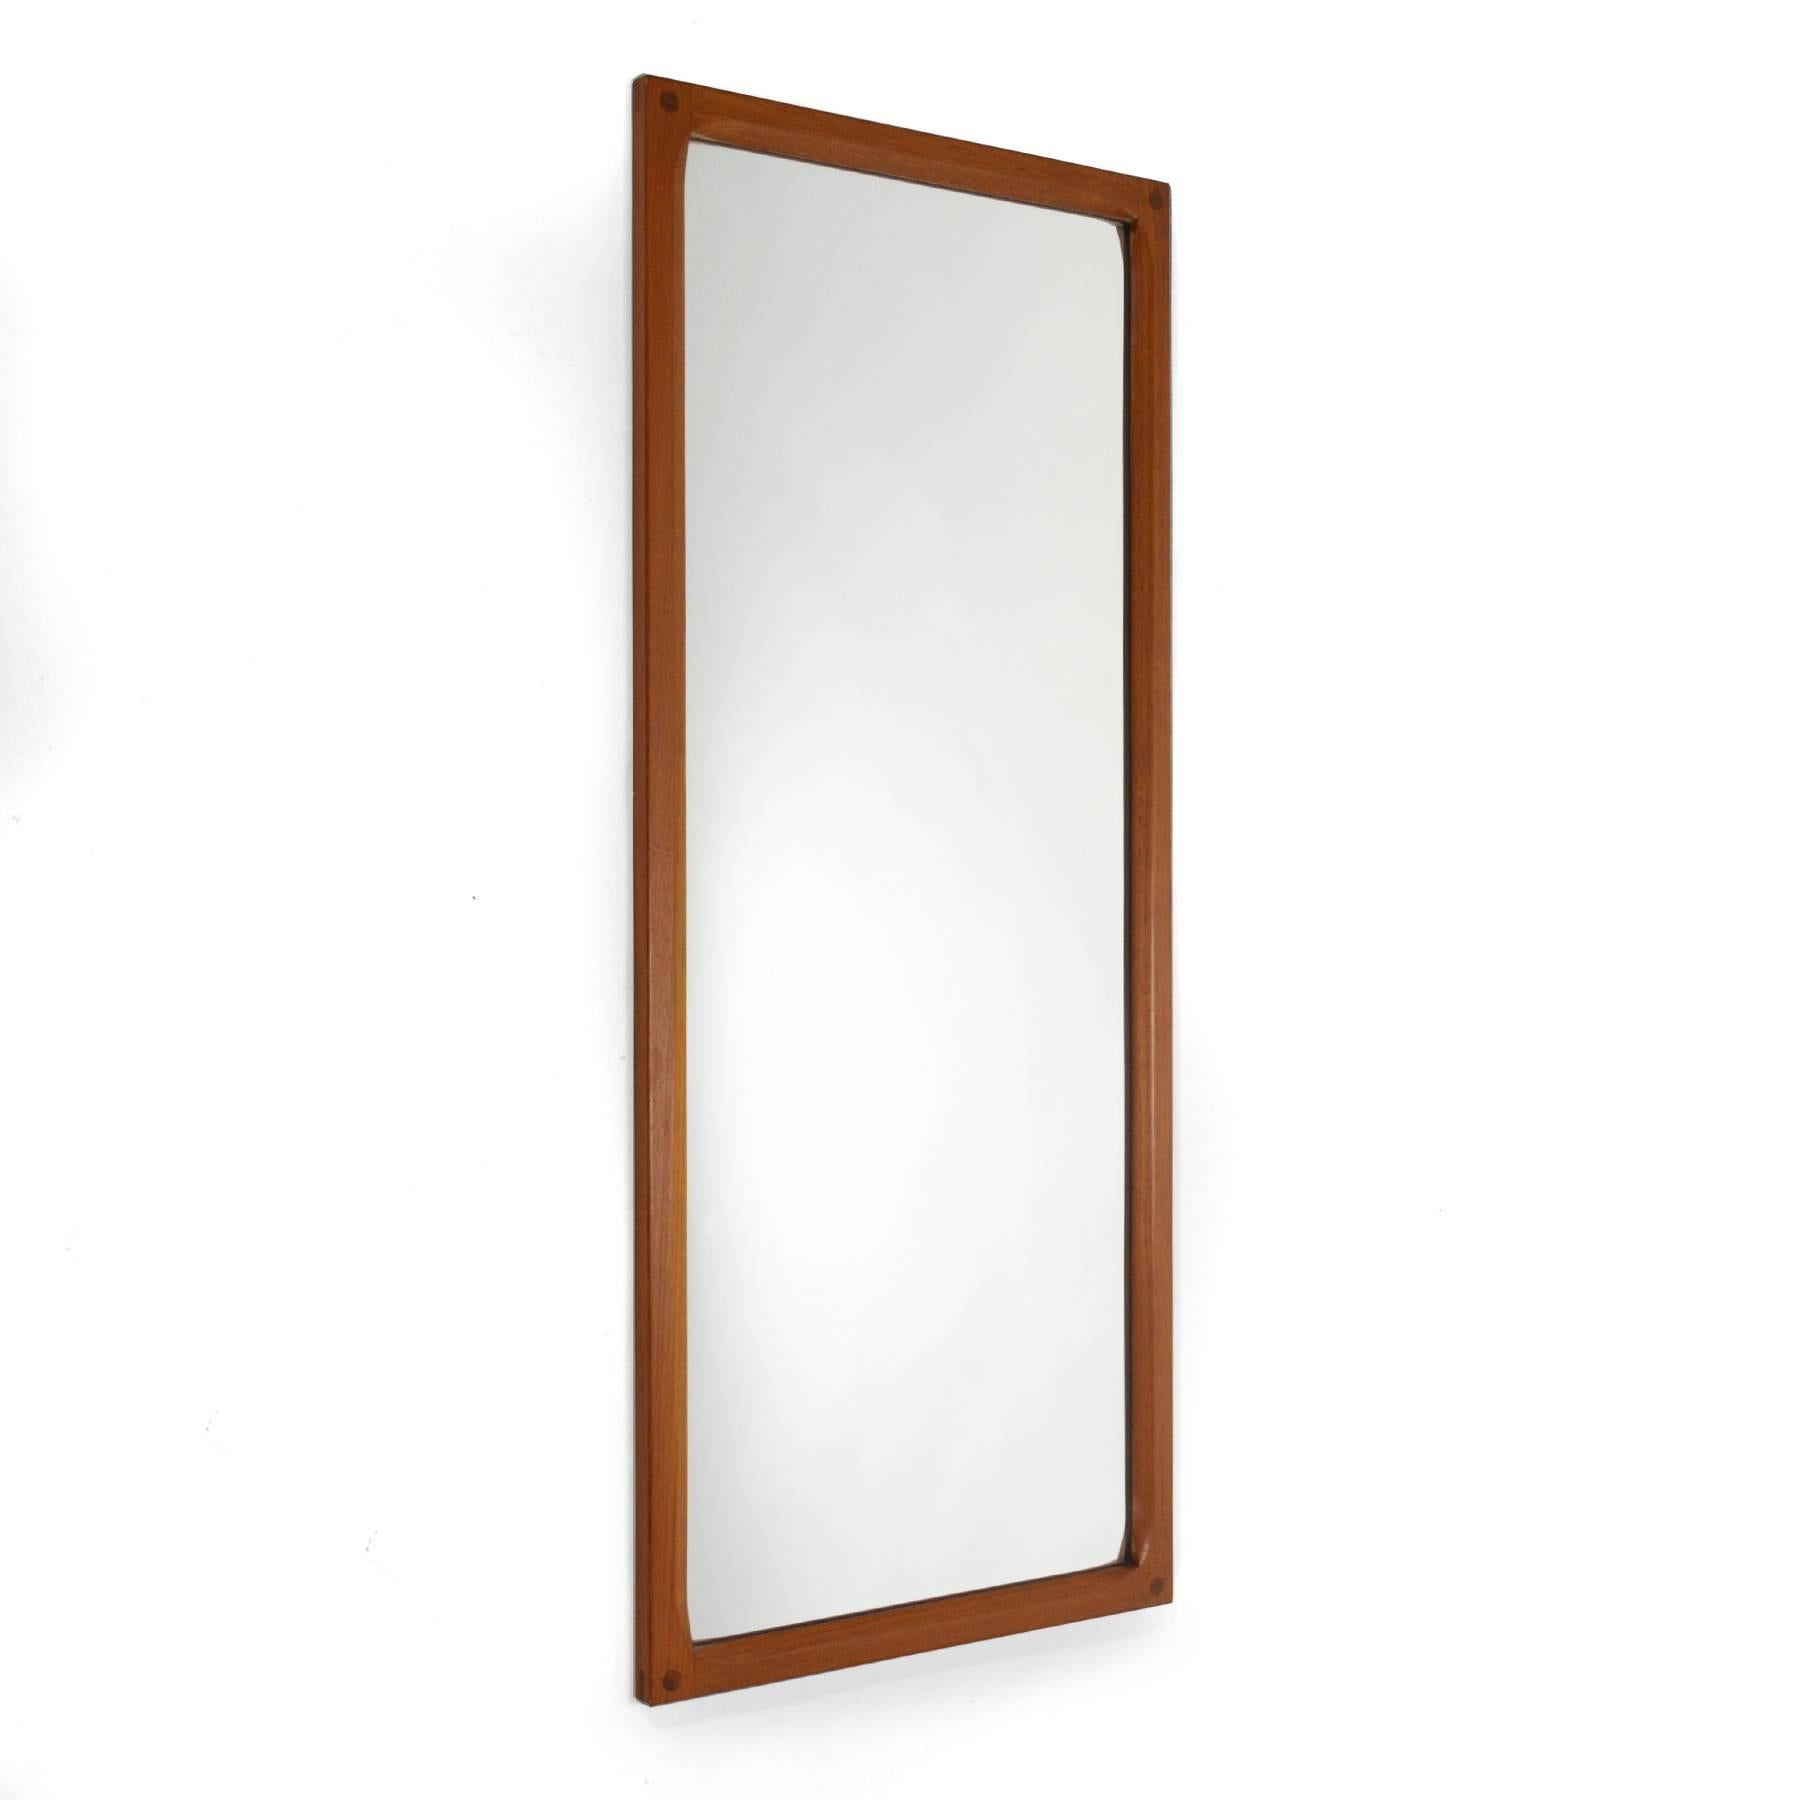 This Aksel Kjersgaard wall mirror by Odder has a beautifully crafted solid teak frame. The interior edges are deeply scalloped and the corners have wonderful exposed joinery.